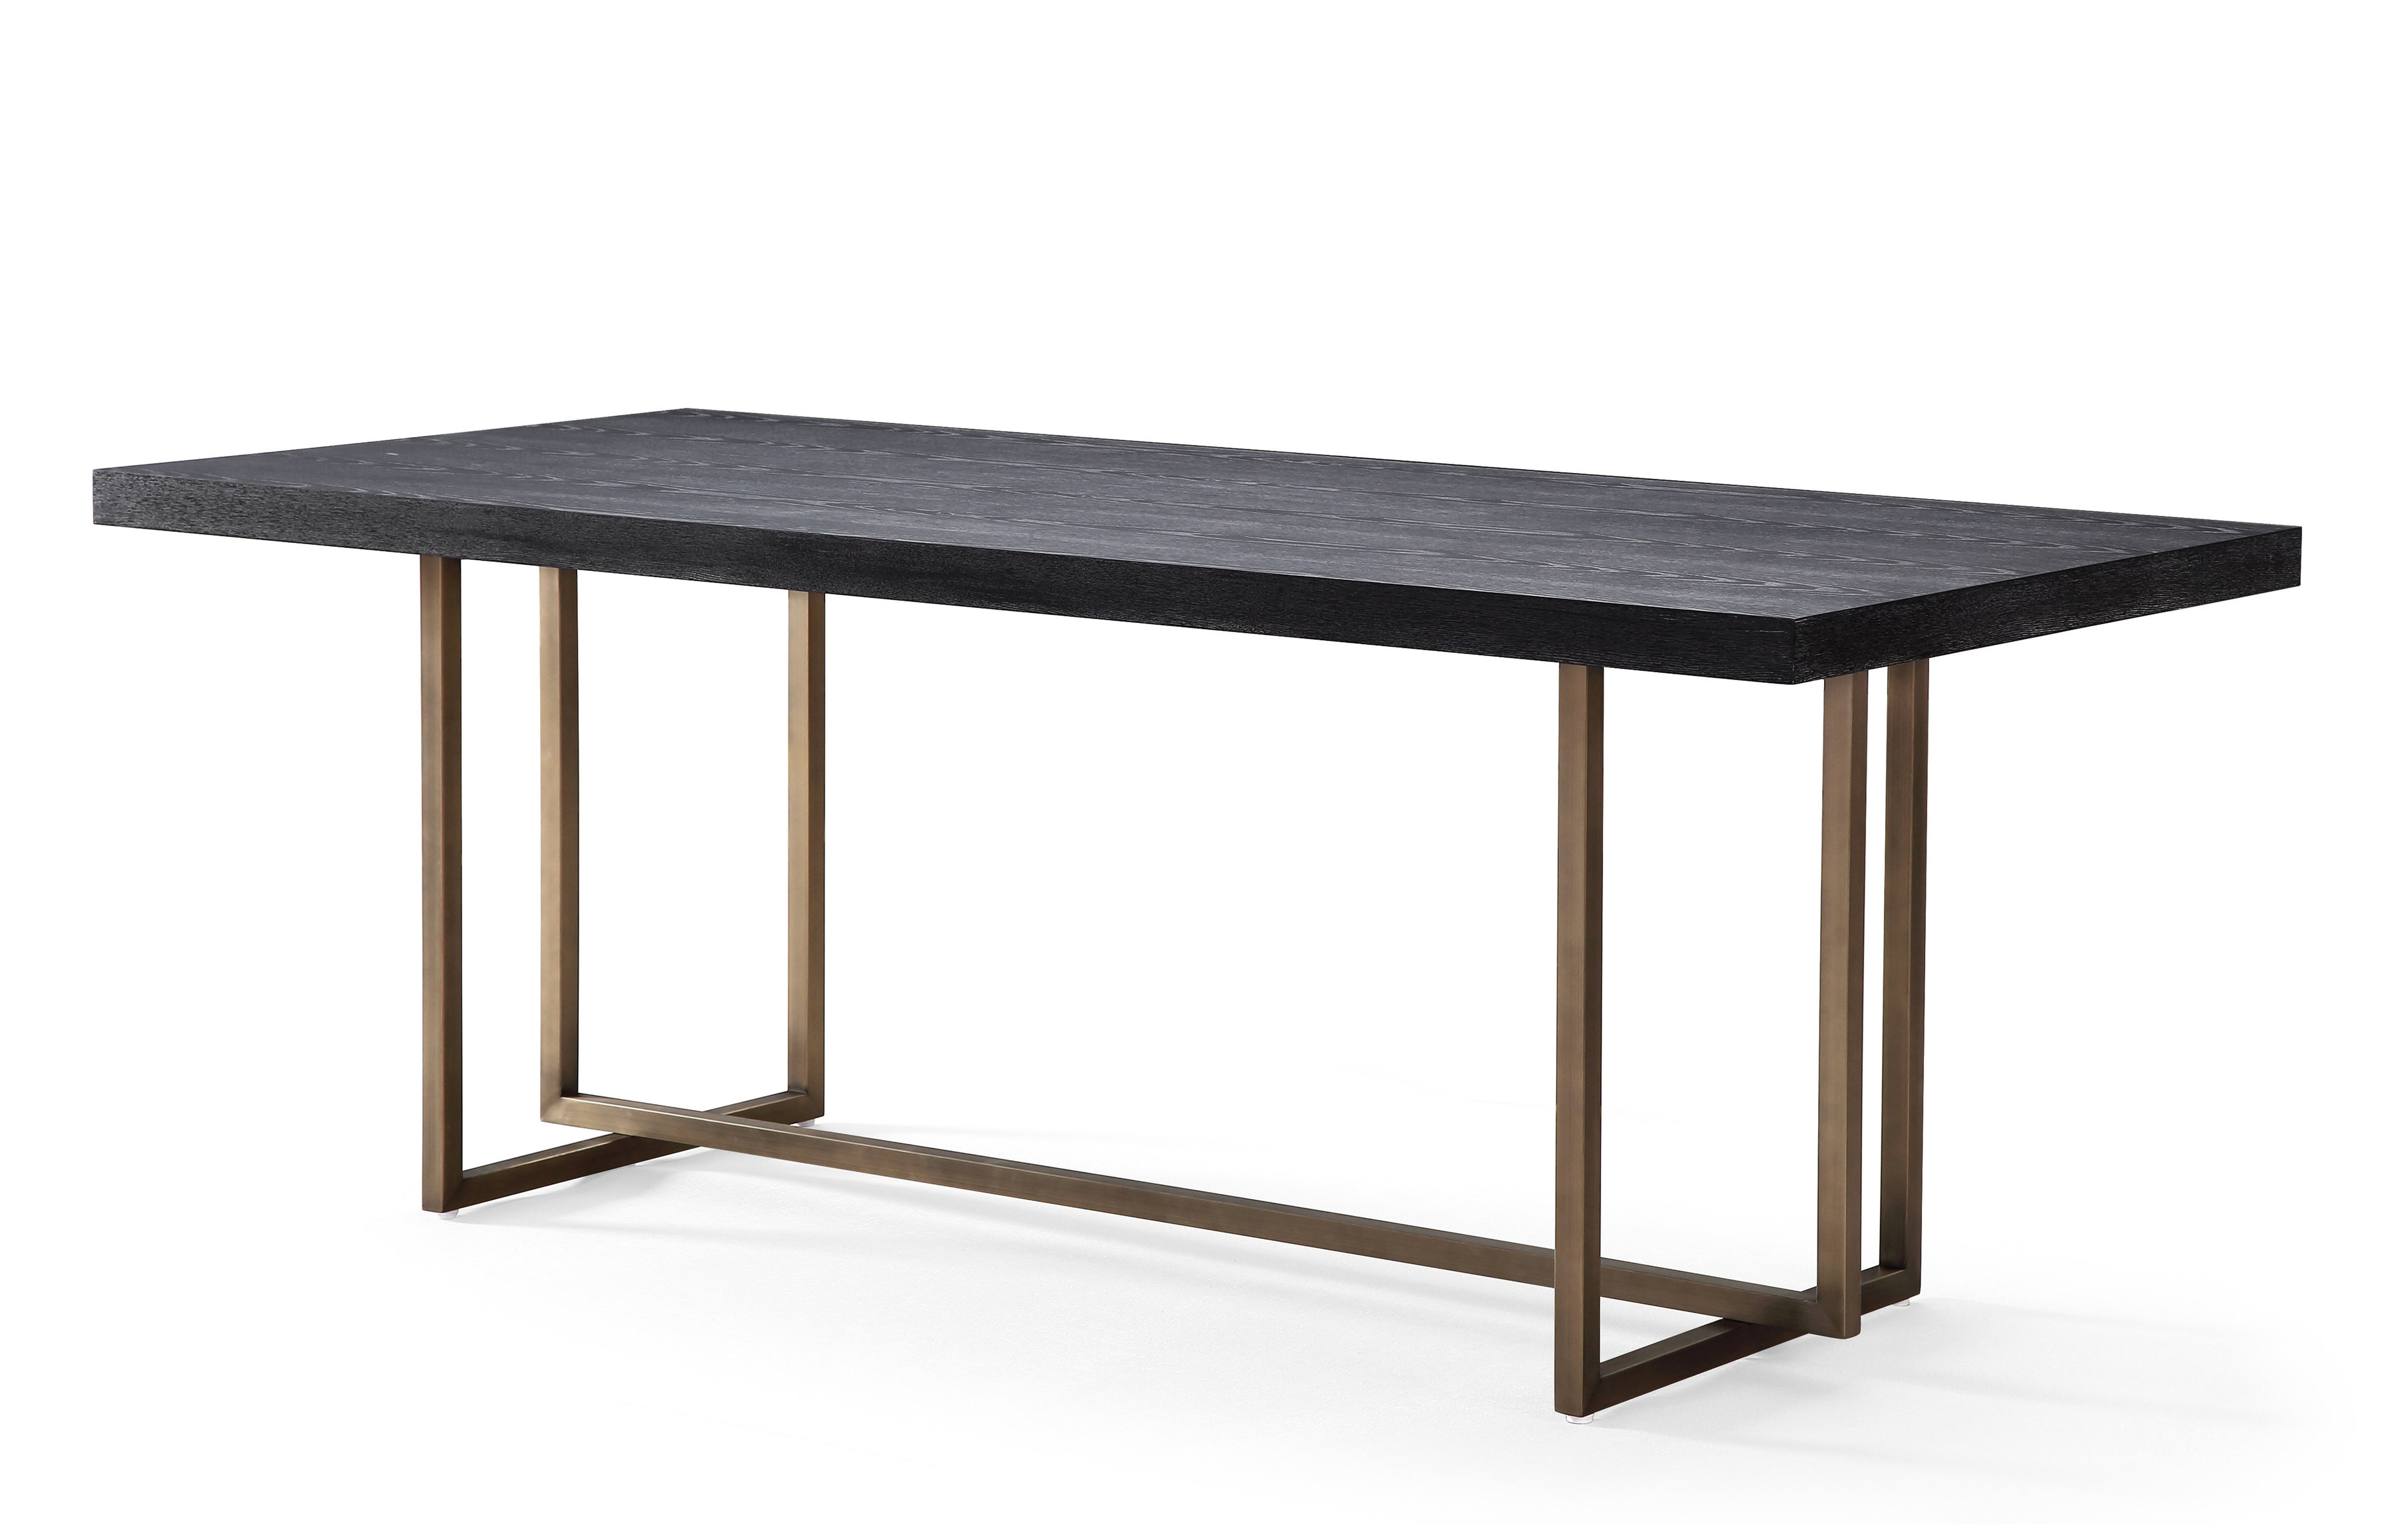 Lola Black 79 Inch Dining Table - Maren Home